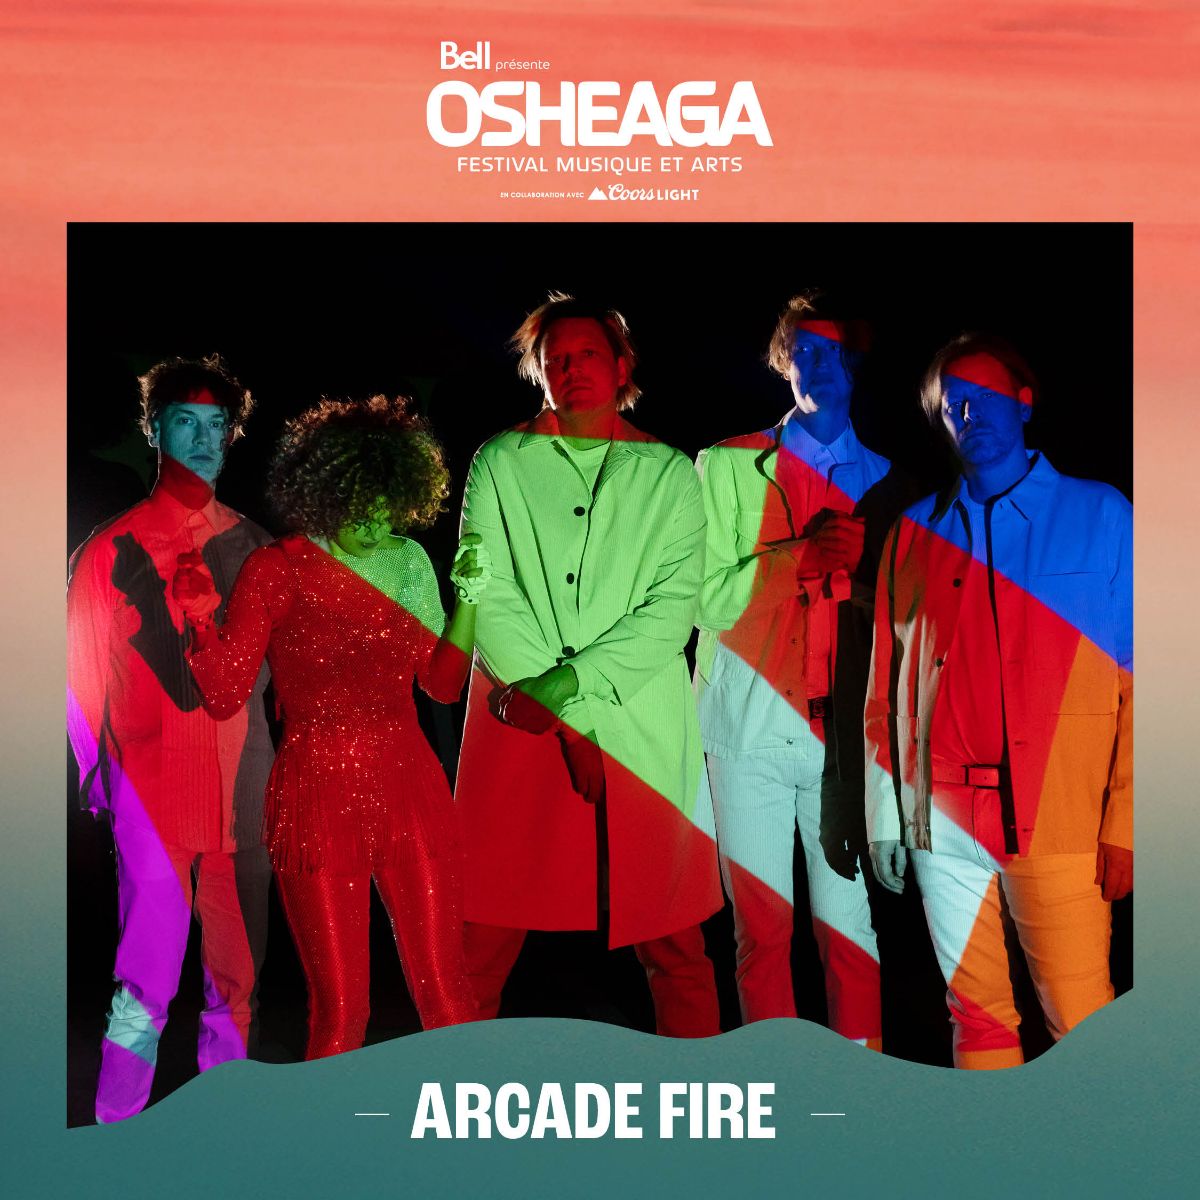 Arcade Fire remplace les Foo Fighters pour lancer Osheaga 2022